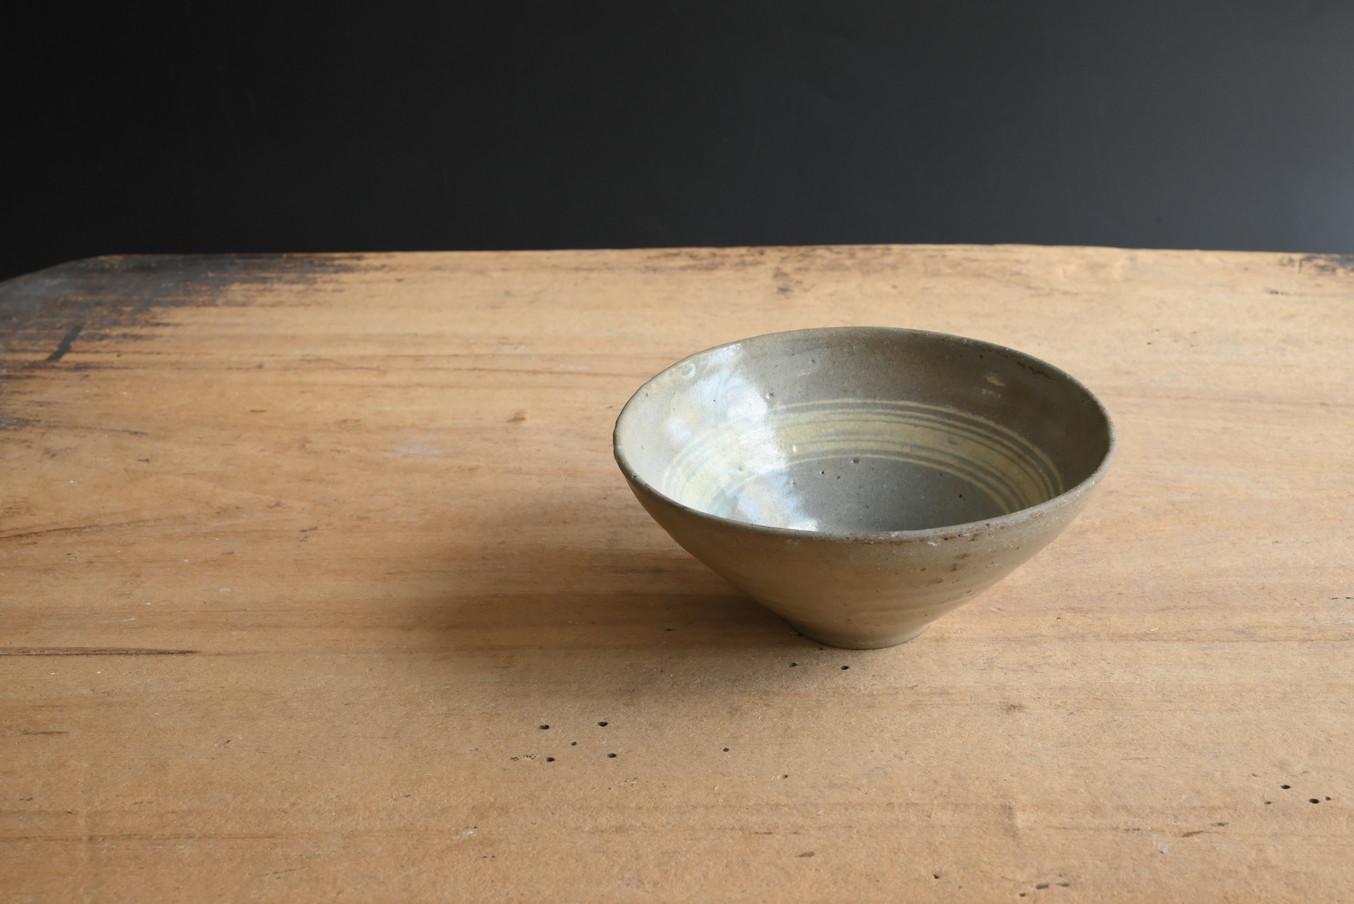 This is a piece of pottery made during the early Joseon Dynasty of the Yi Dynasty in South Korea.
This tea bowl, which was made around the 15th century, was used by common people and was made as a practical item.
In an era when white porcelain was